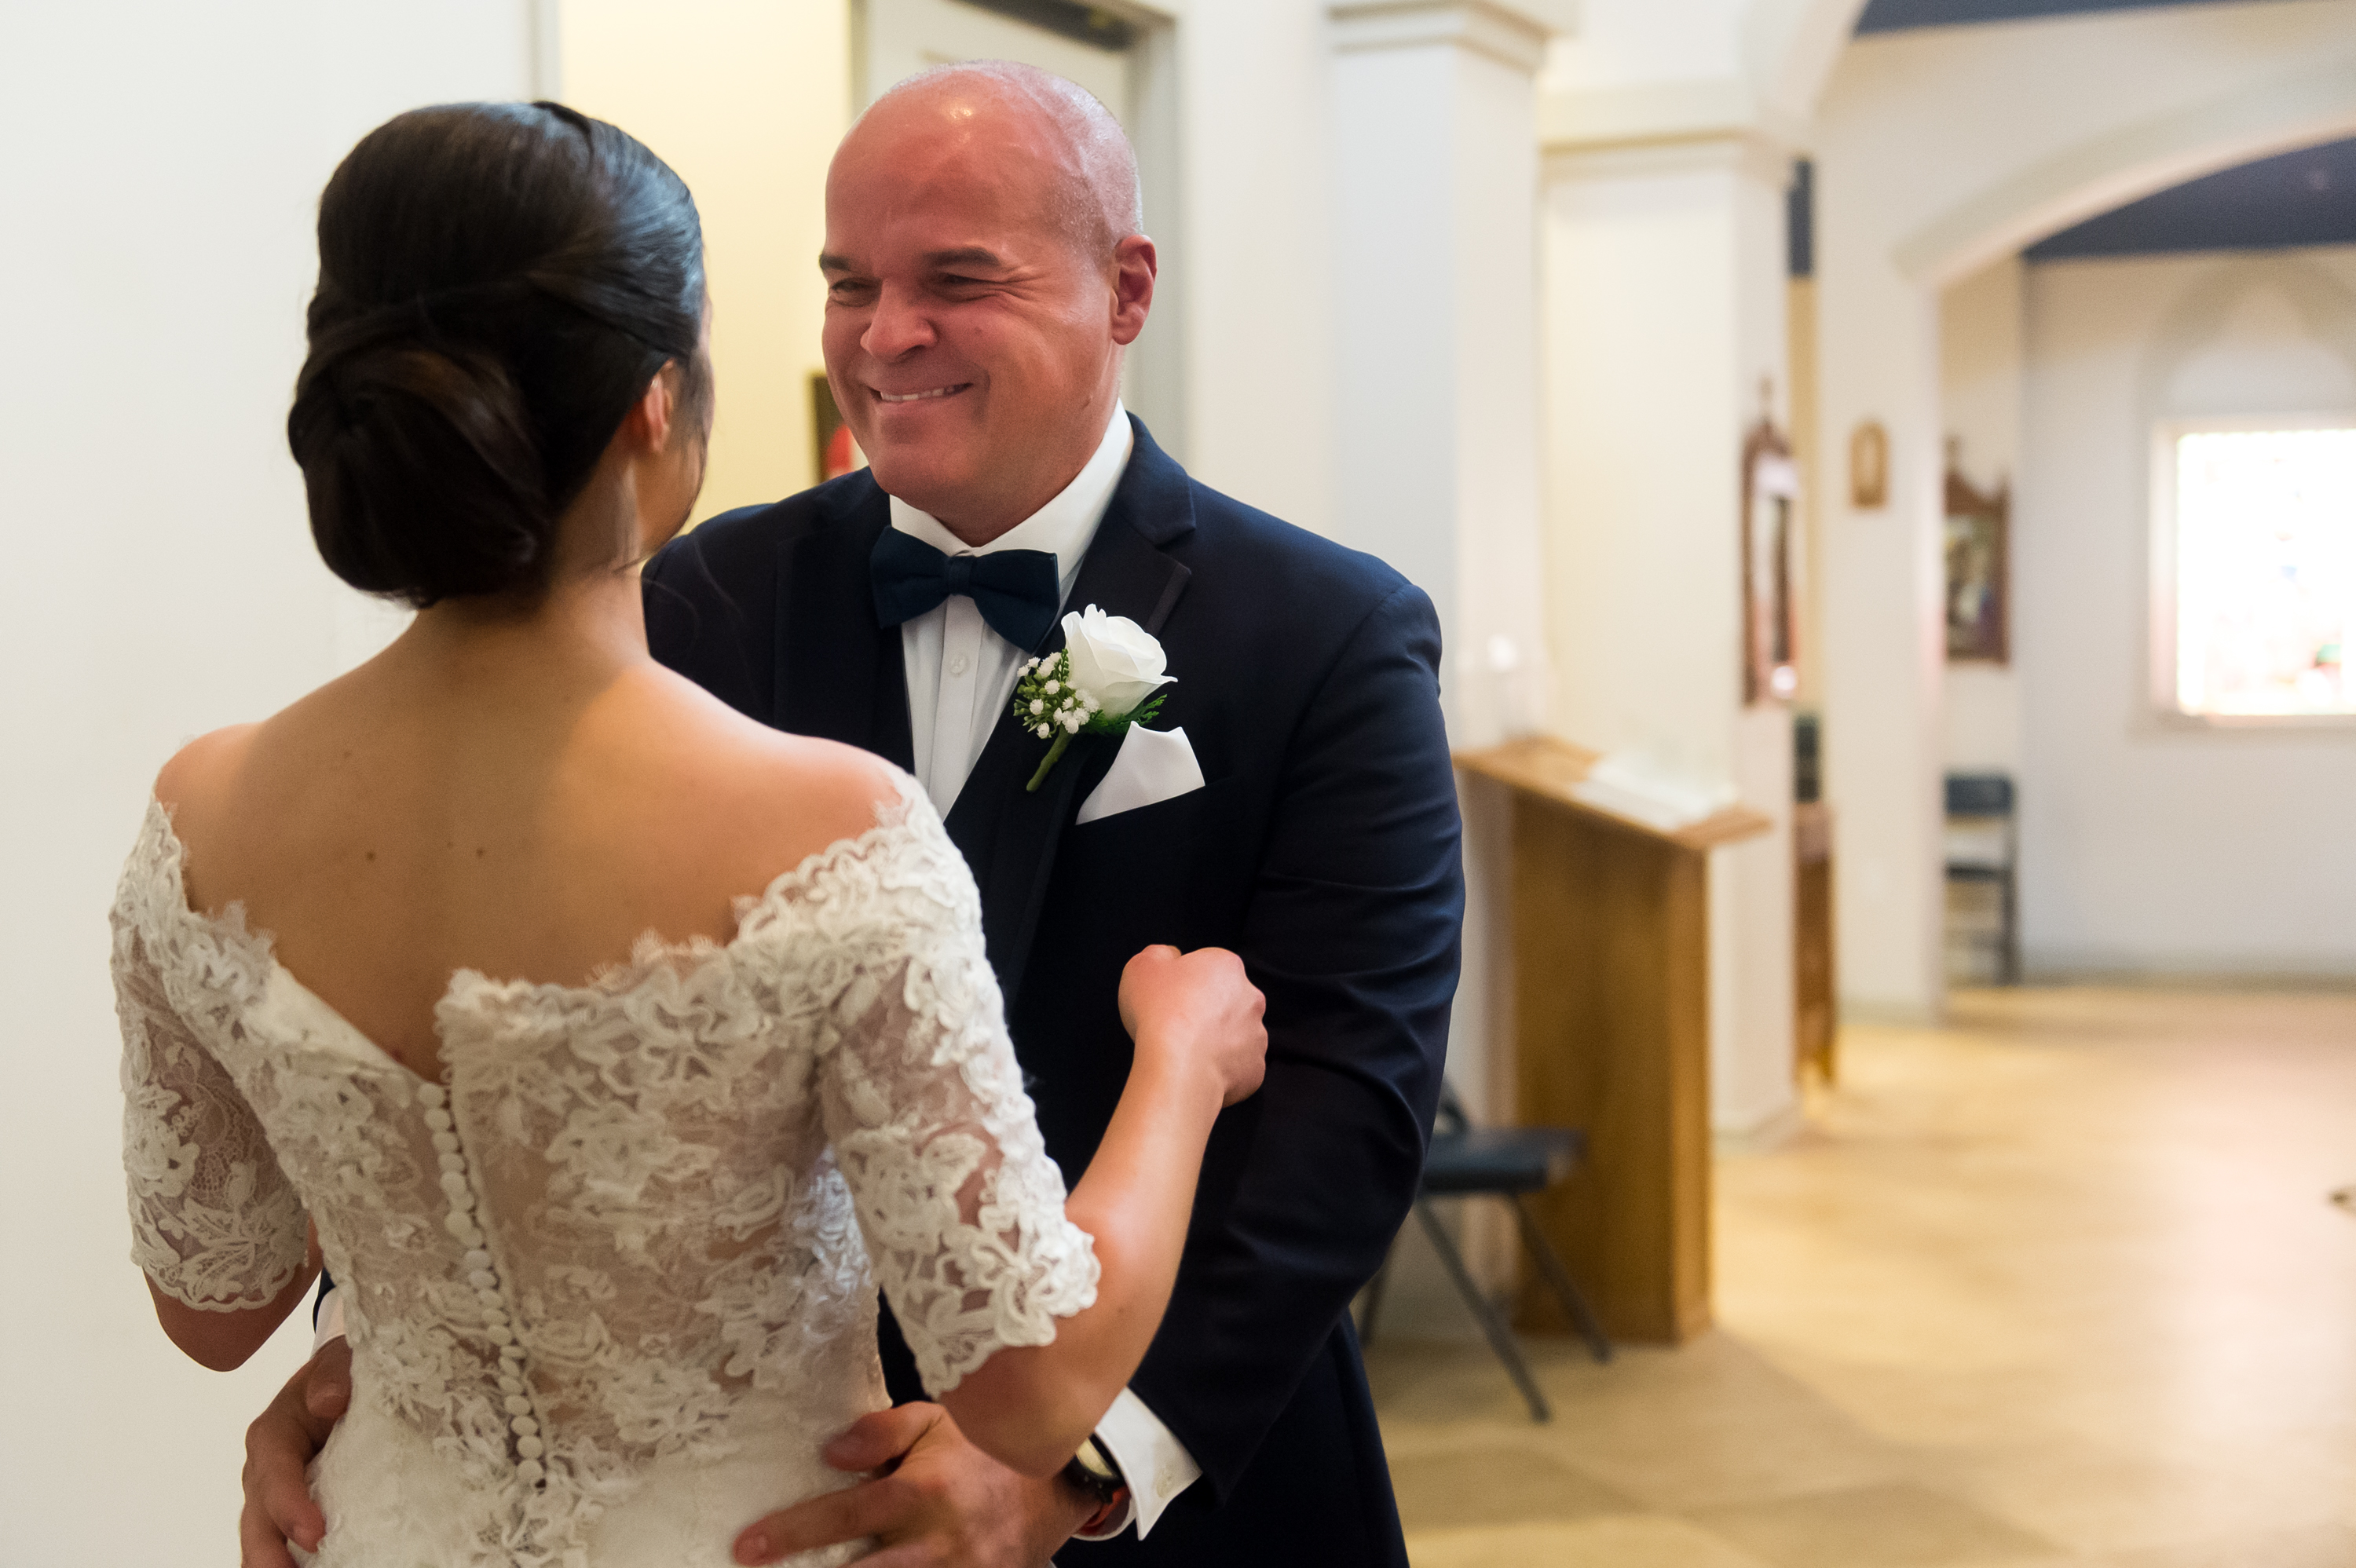 The father of the bride reacts before his daughter's wedding at Our Lady of Mt. Carmel in Littleton, Colorado.